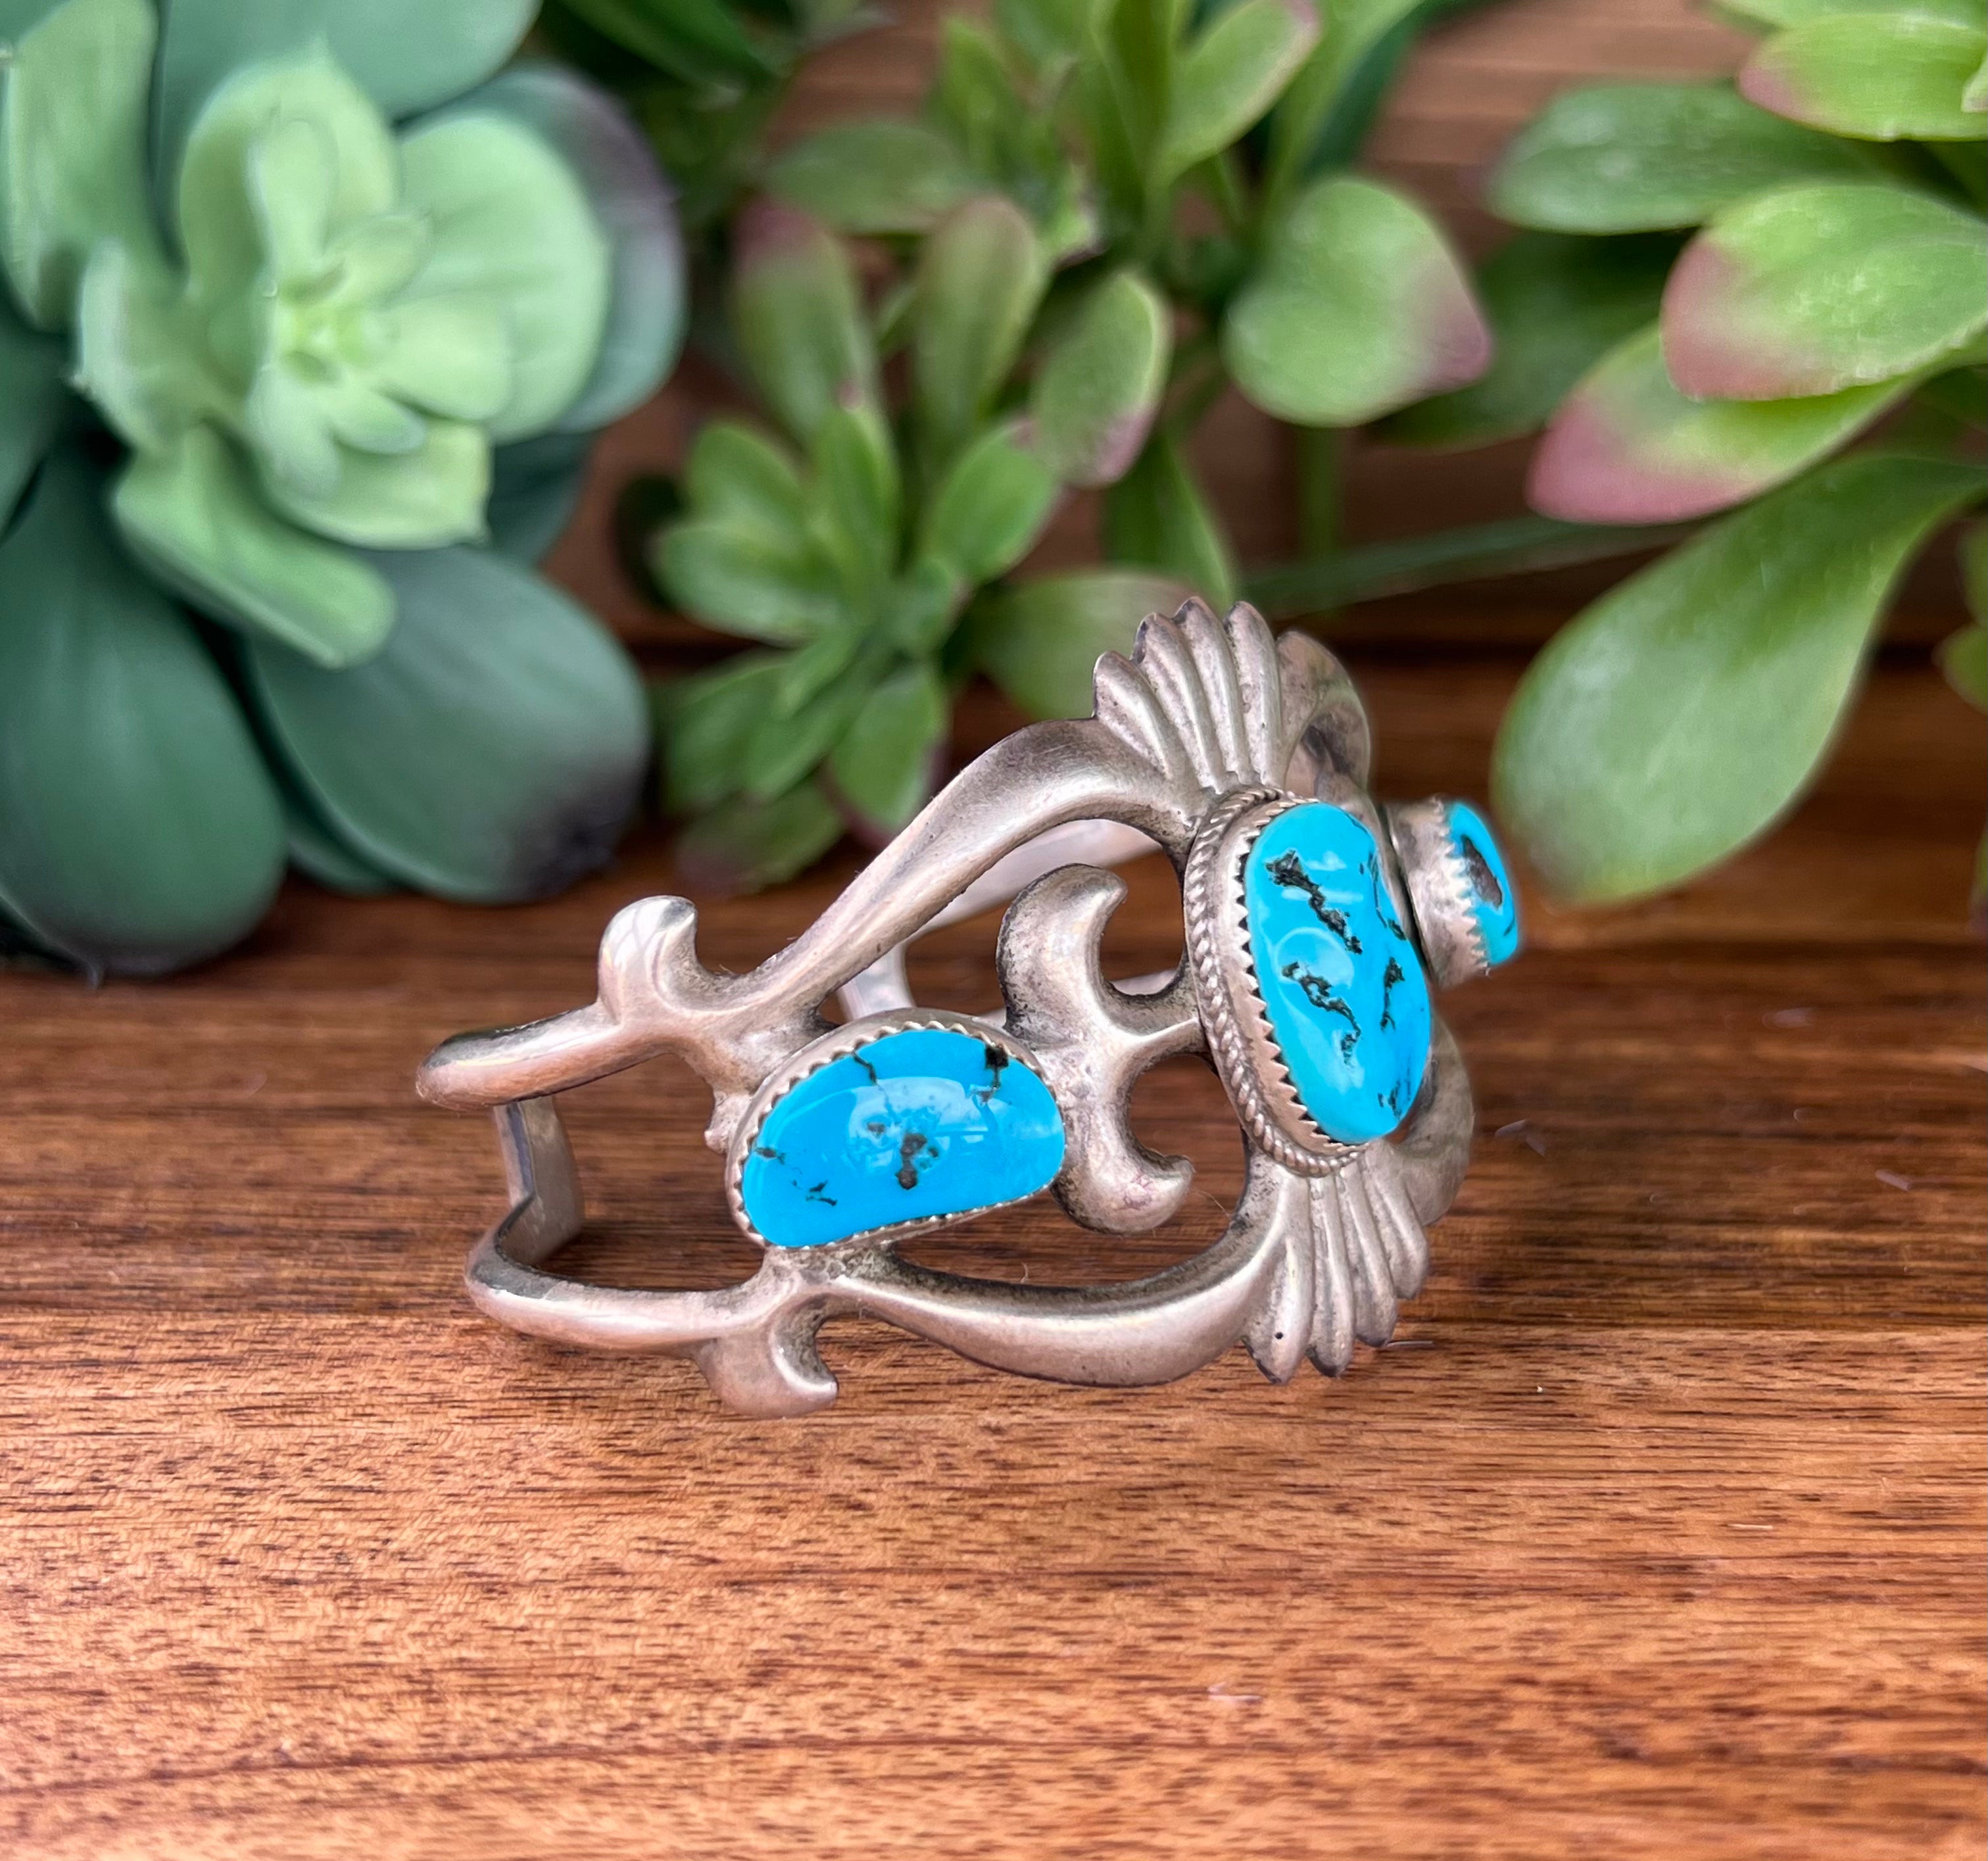 Vintage Navajo Made Sleeping Beauty Turquoise & Sterling Silver Cuff Bracelet